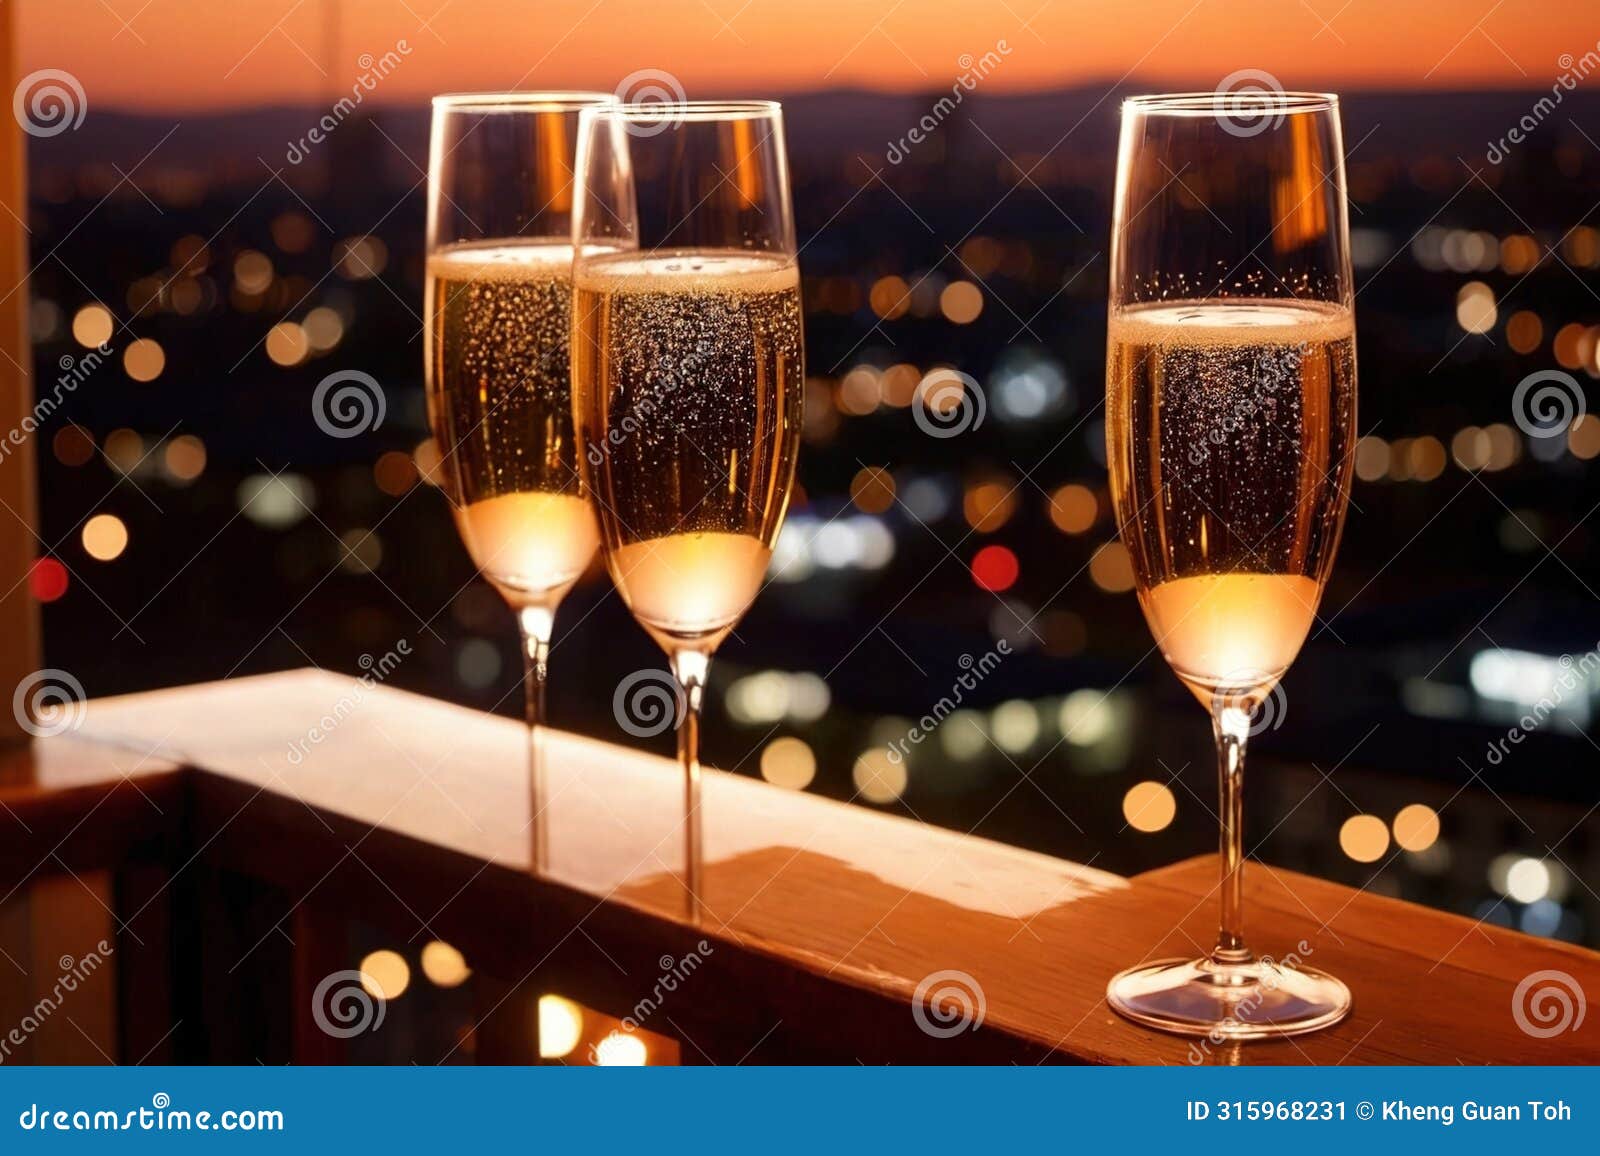 champagne glasses flutes on balcony overlooking city, festive special occasion